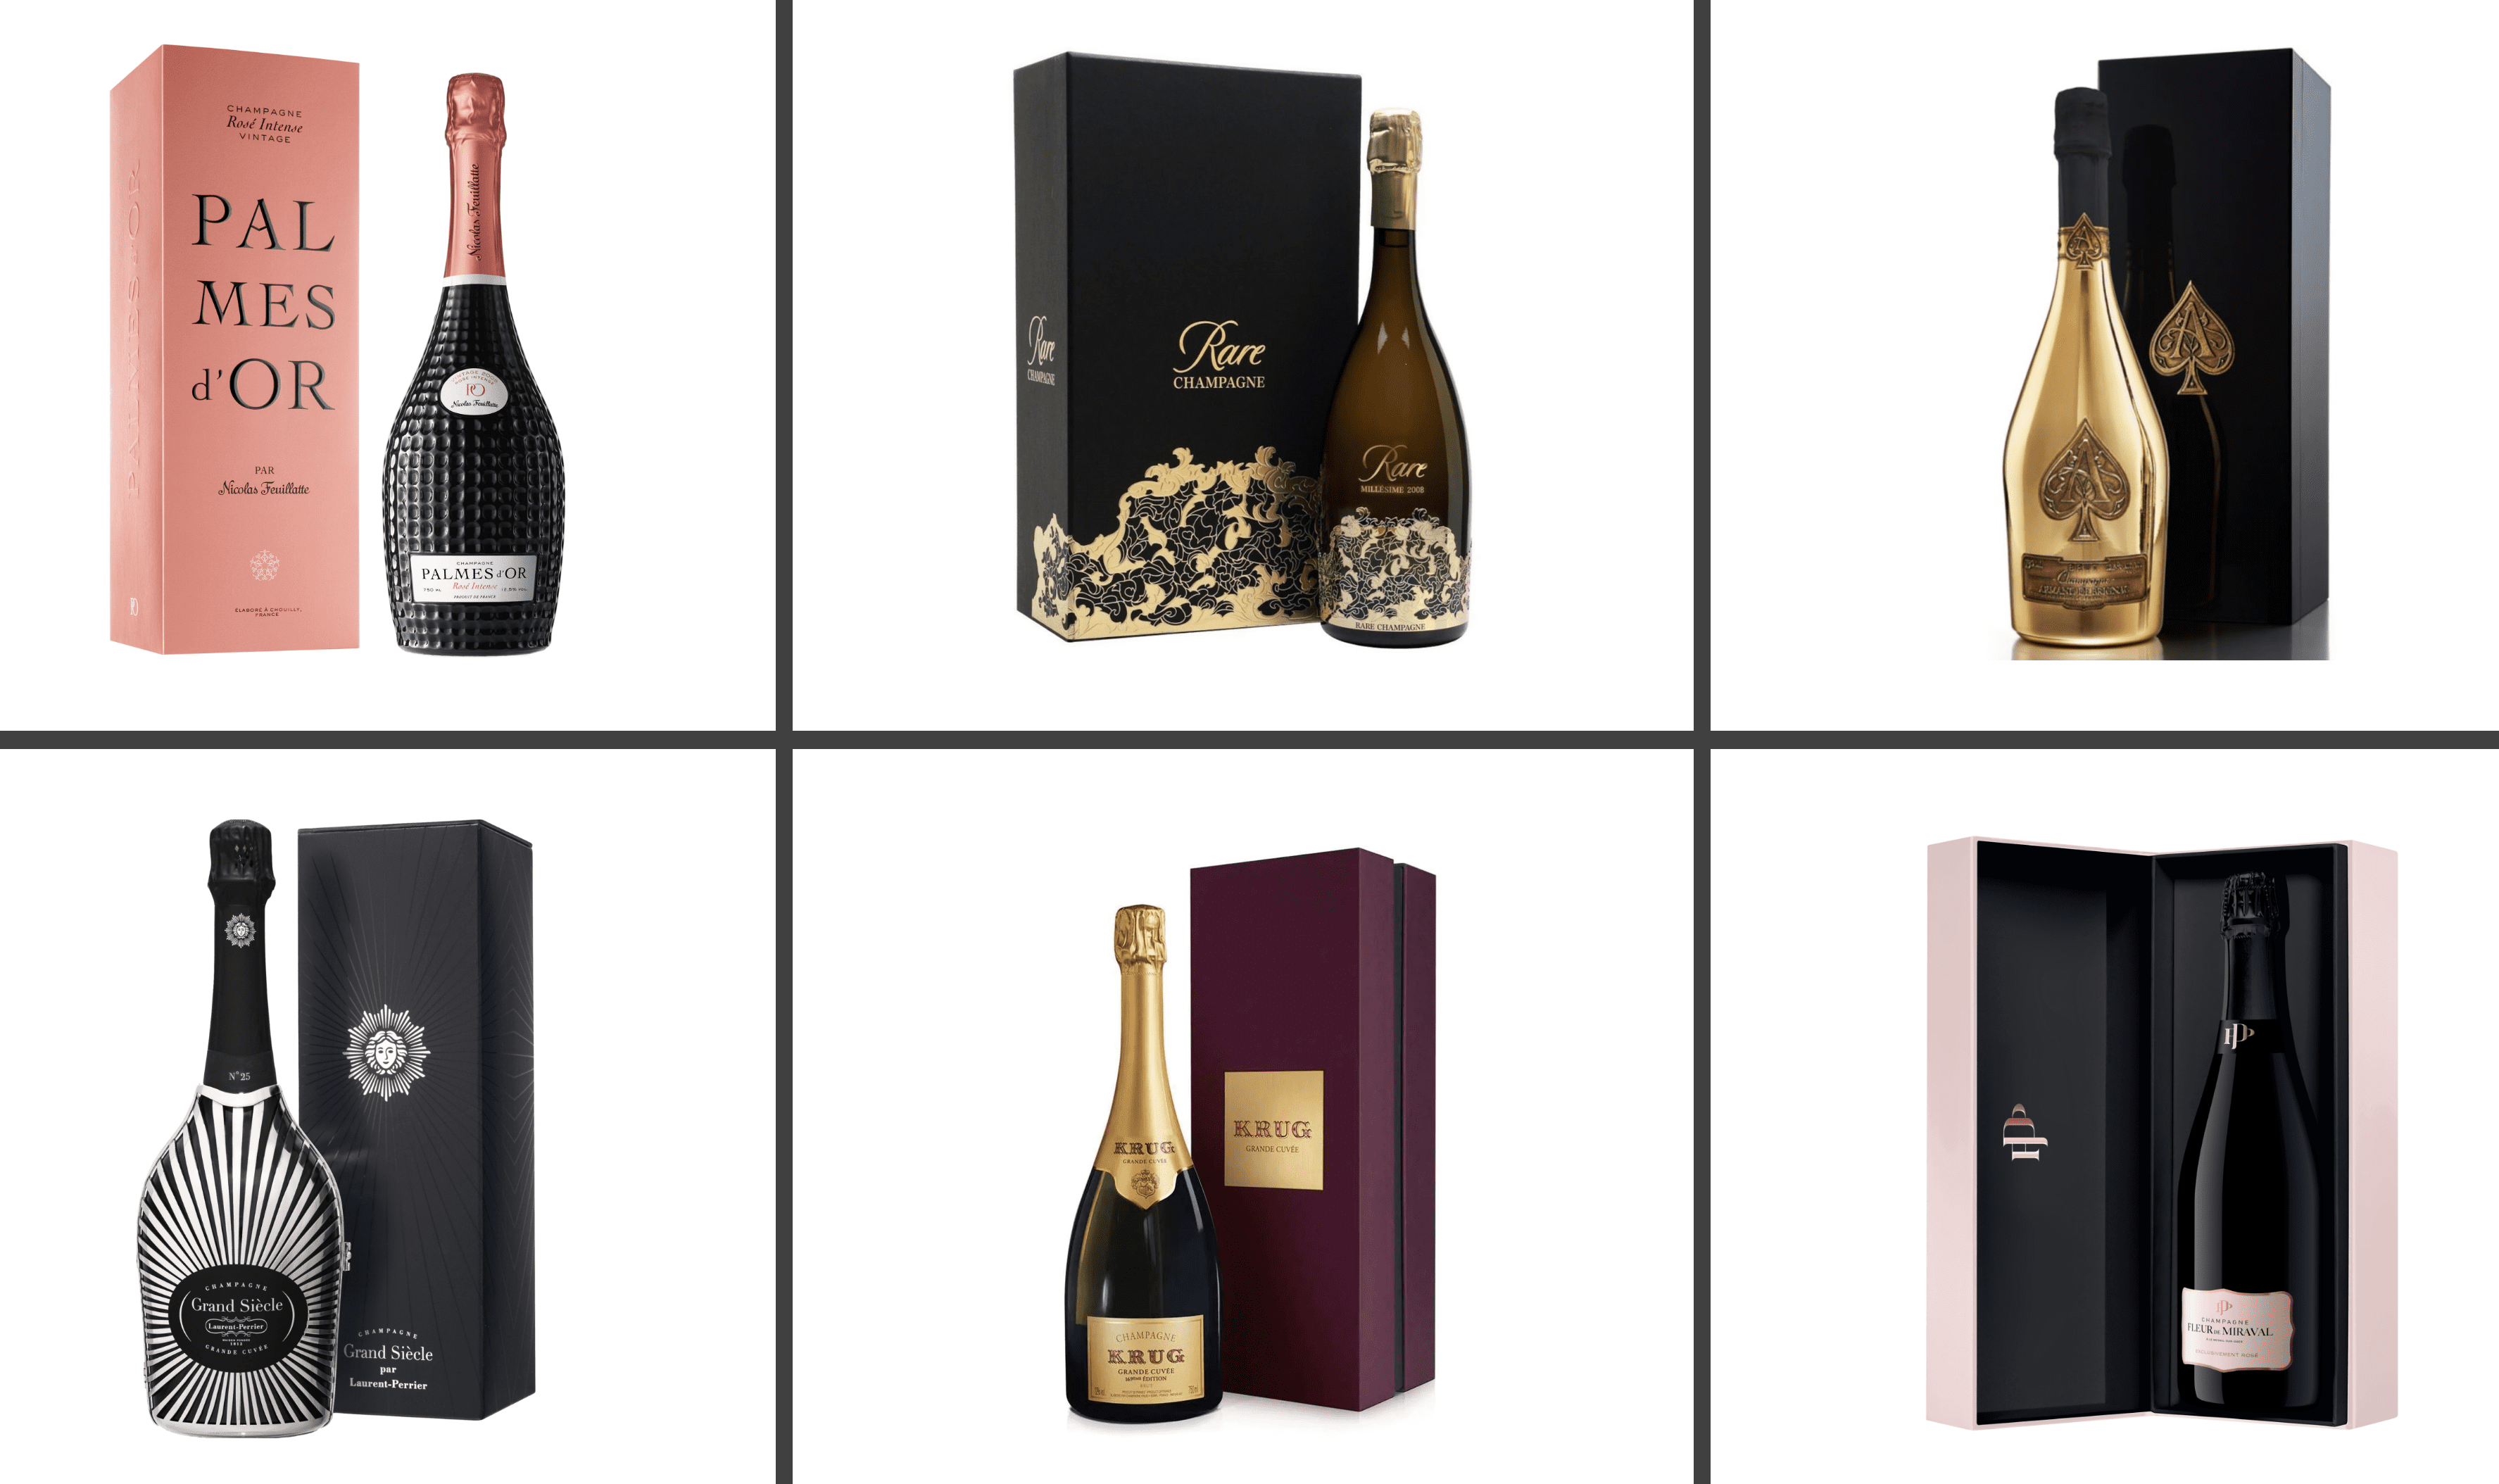 multi-vintage-and-nonvintage-champagnes